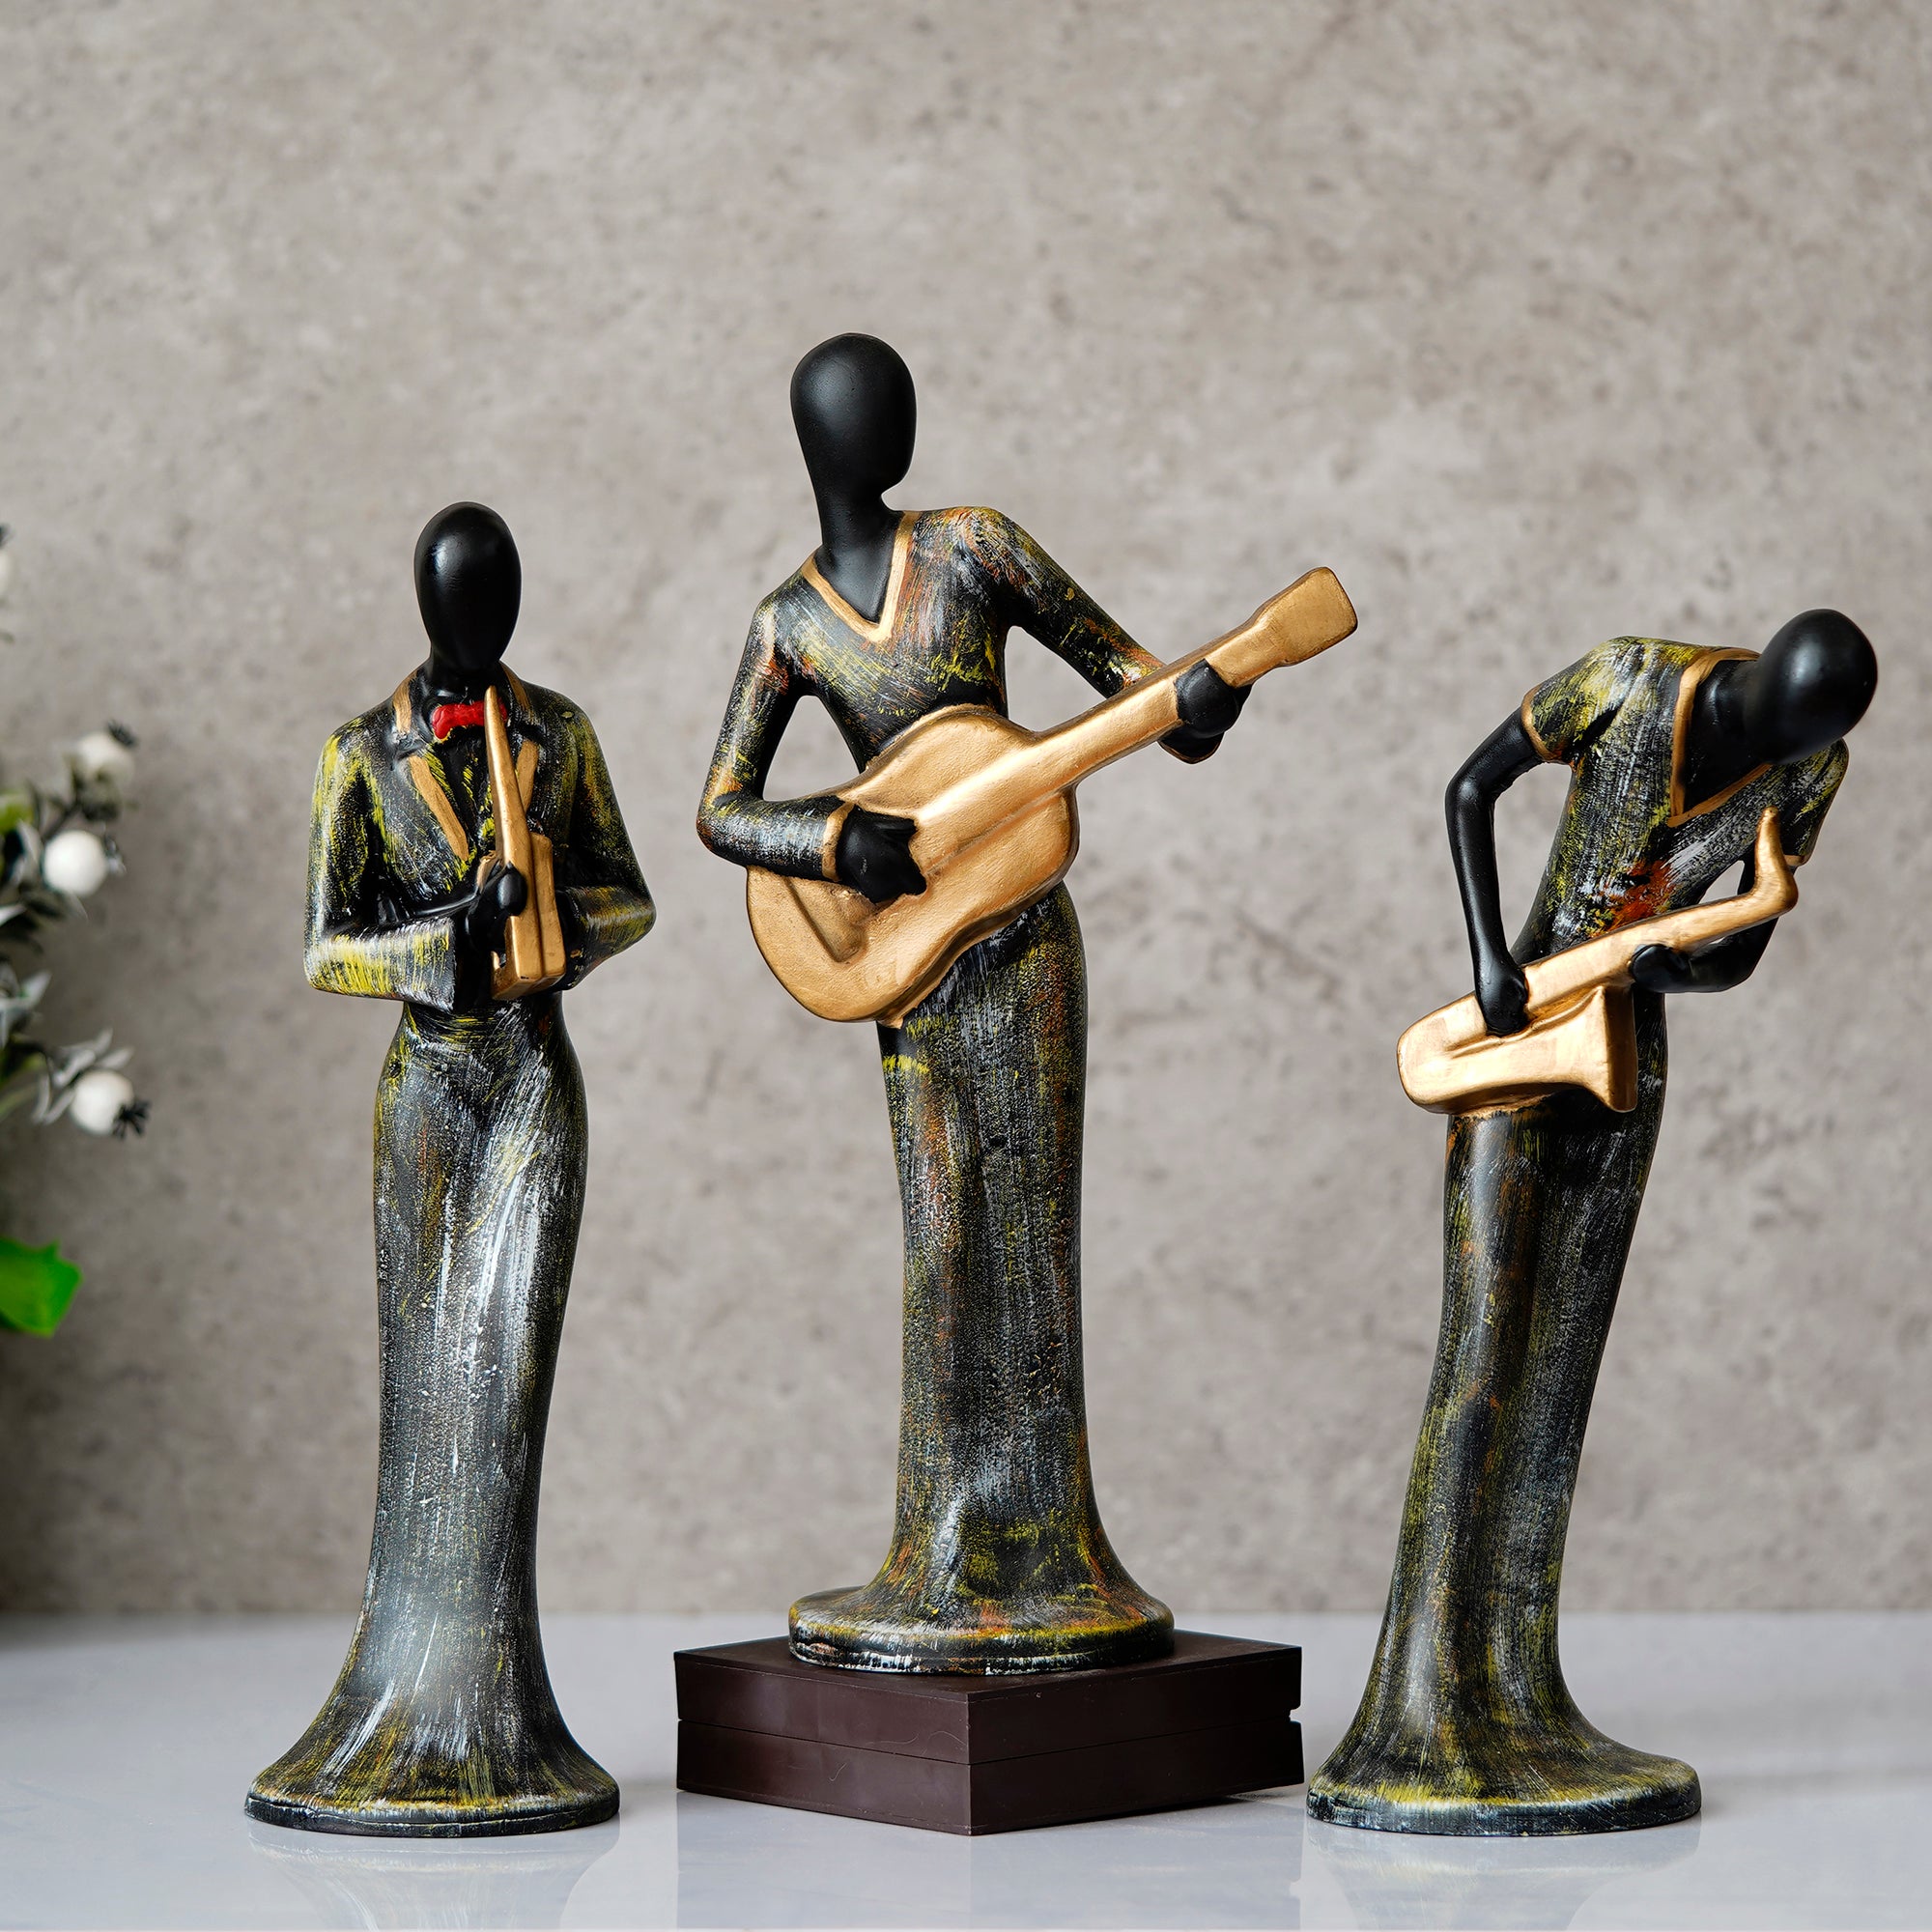 Grey and Black Polyresin Set of 3 Ladies figurines Playing Wind, Guitar,Saxophone Musical Instrument Handcrafted Decorative Showpiece 1